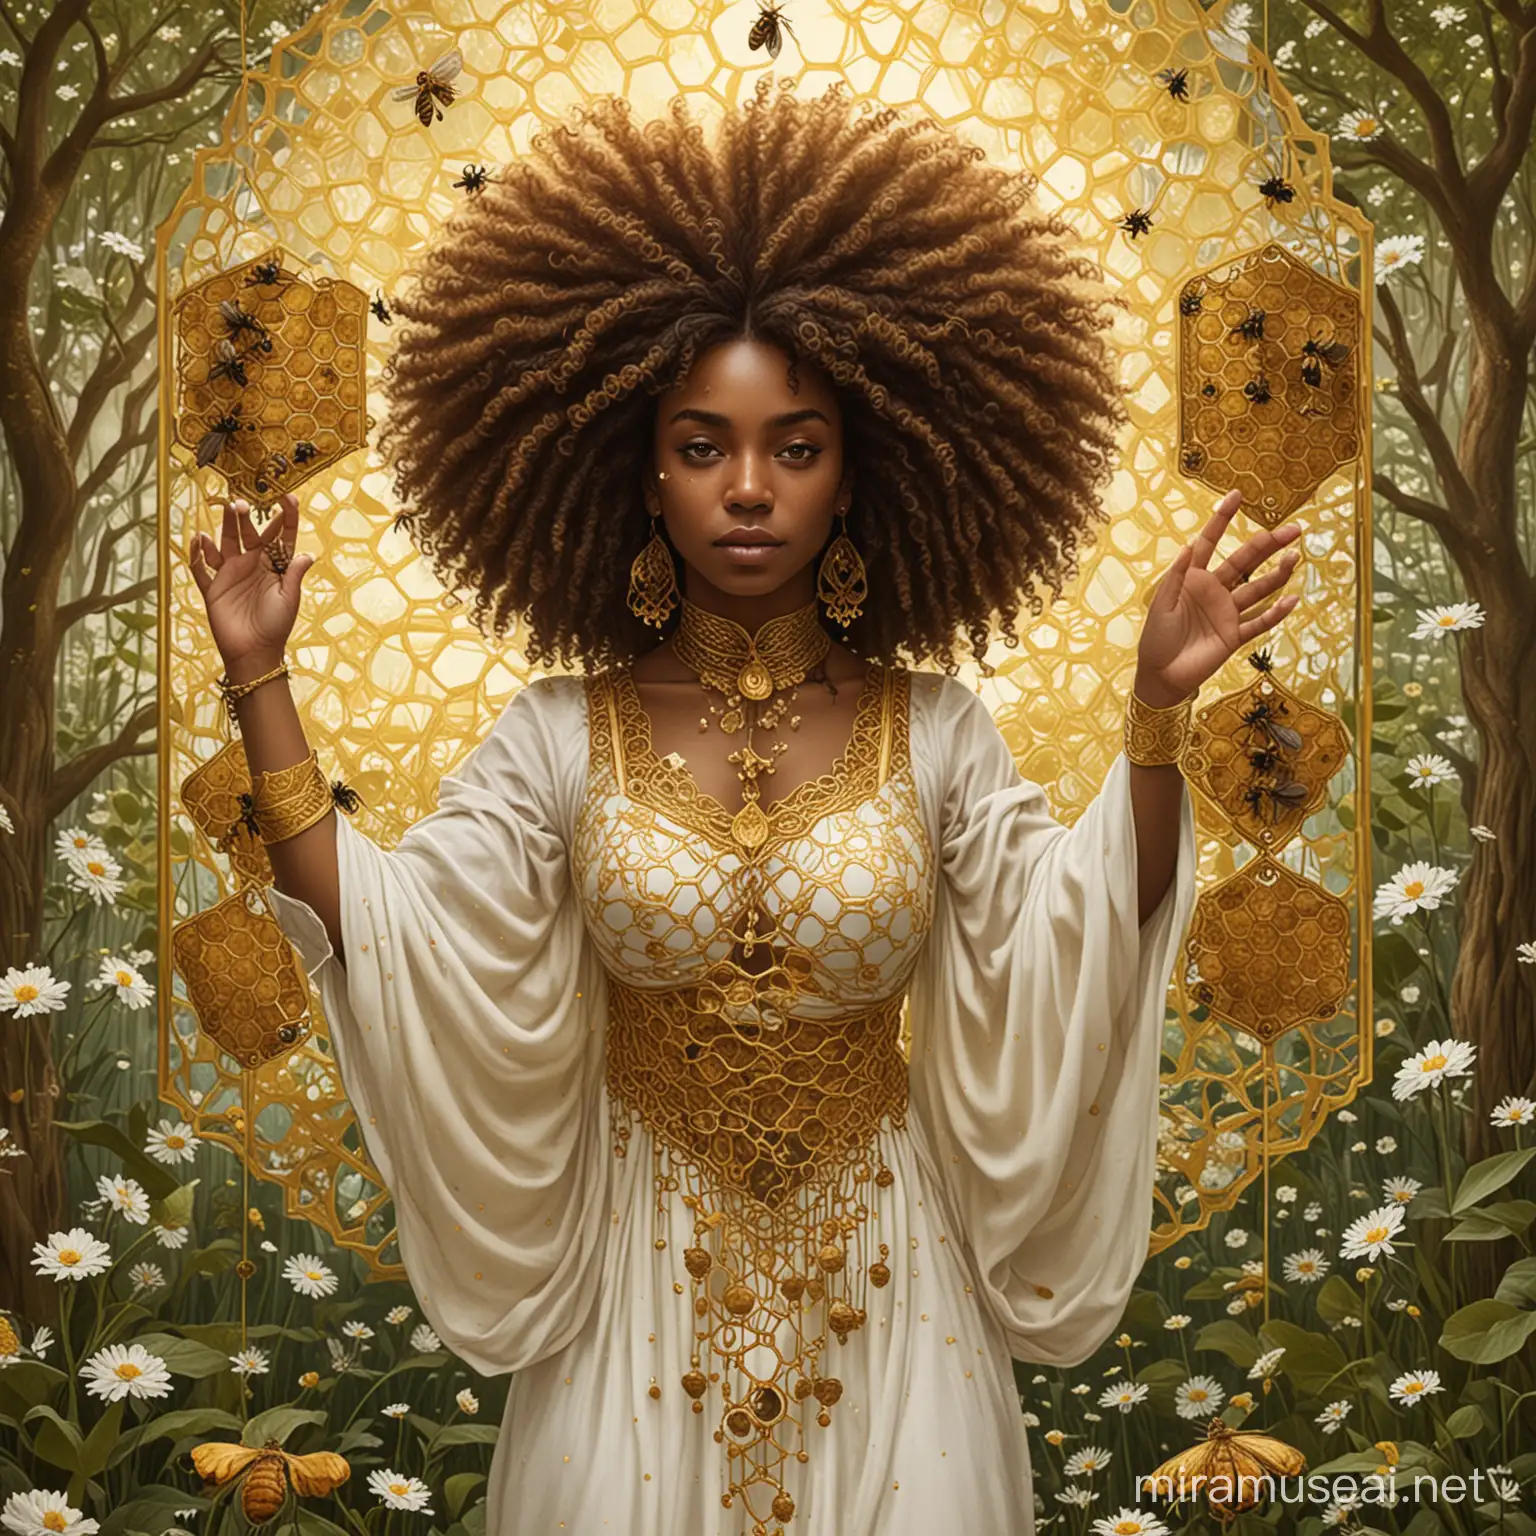 AfroIndigenous Woman Suspended in Honeycomb Enchanted Garden Tarot Card